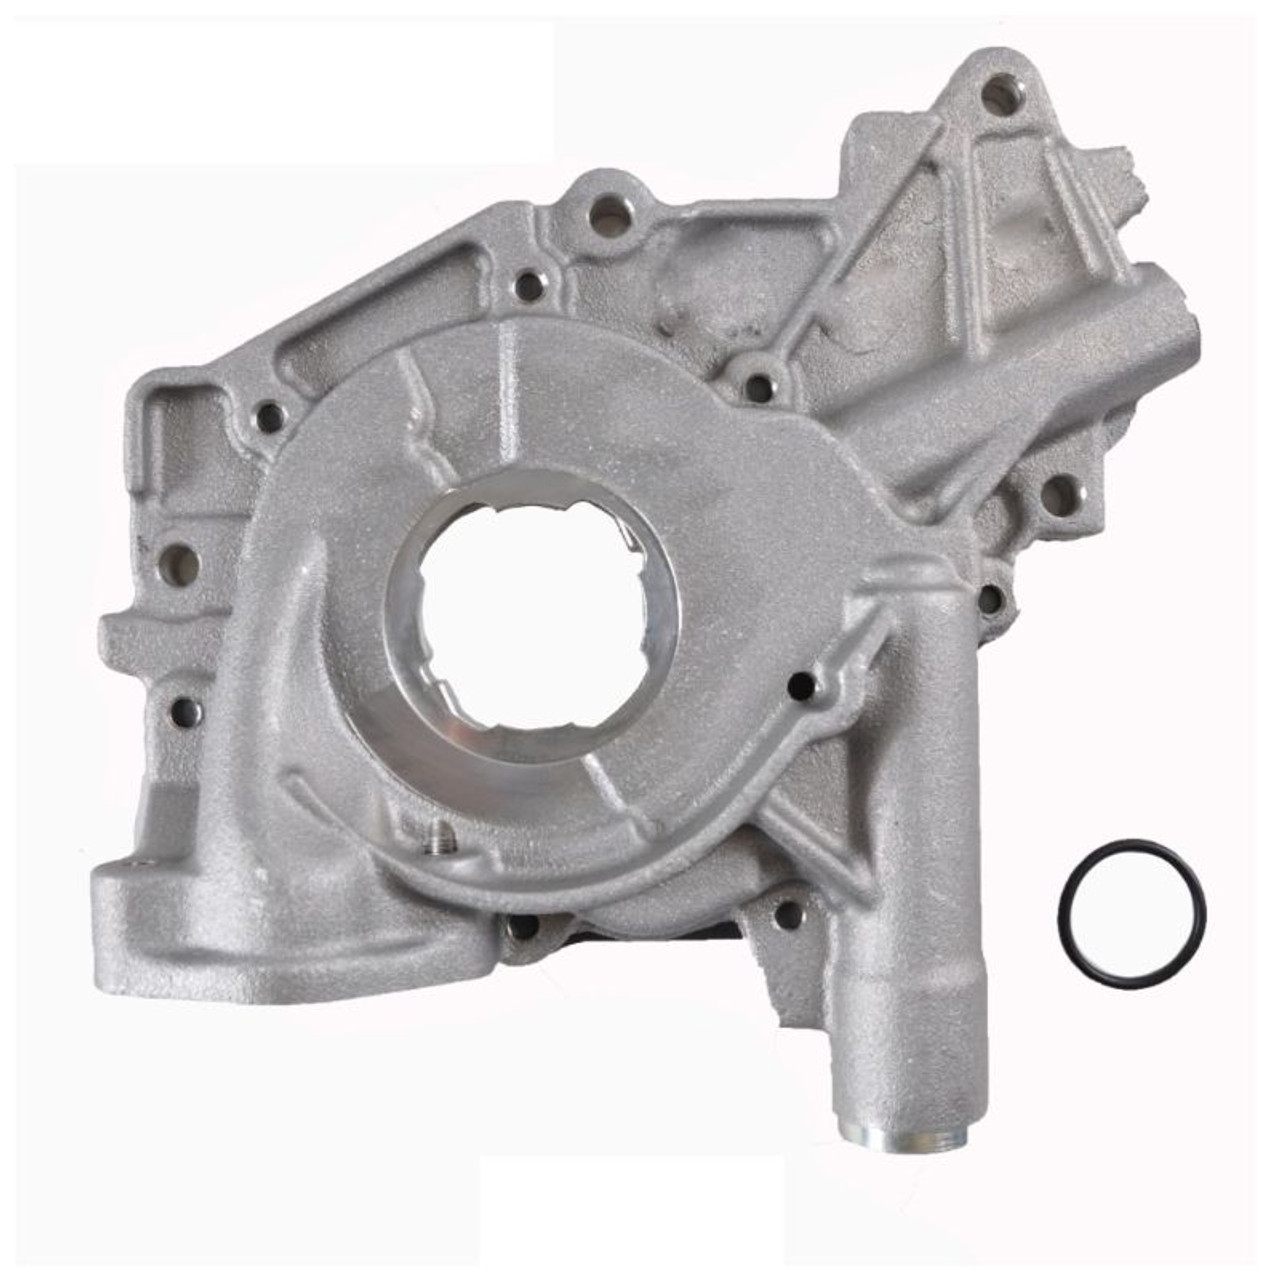 Oil Pump - 2005 Ford Freestyle 3.0L (EP211.F55)